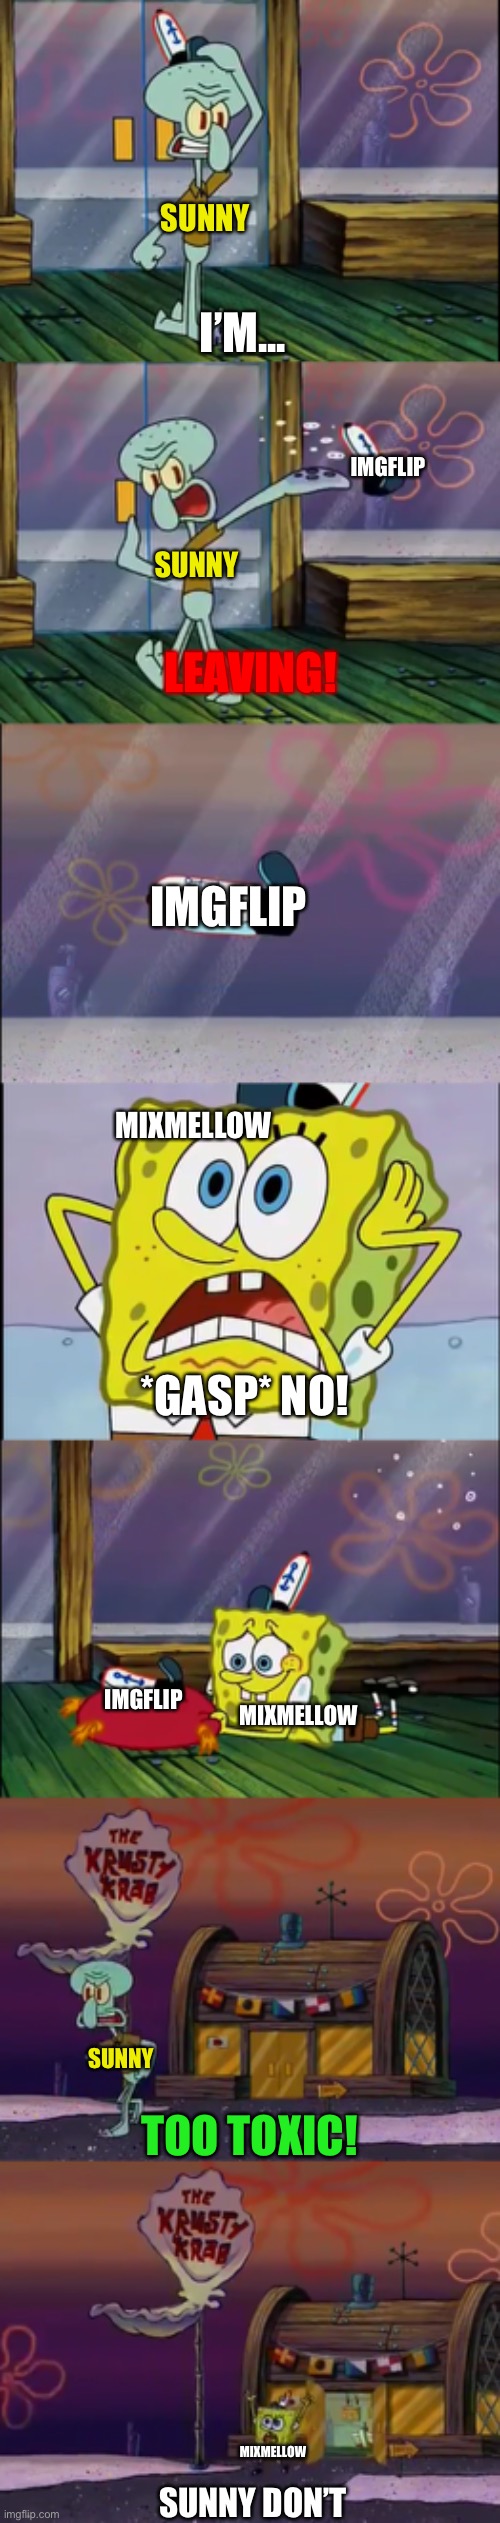 Oh if only Mixmellow was real to stop Sunny from leaving #SaveSunny | SUNNY; I’M... IMGFLIP; SUNNY; LEAVING! IMGFLIP; MIXMELLOW; *GASP* NO! IMGFLIP; MIXMELLOW; SUNNY; TOO TOXIC! MIXMELLOW; SUNNY DON’T | image tagged in spongebob,mixmellow,sunny,squidward,memes | made w/ Imgflip meme maker